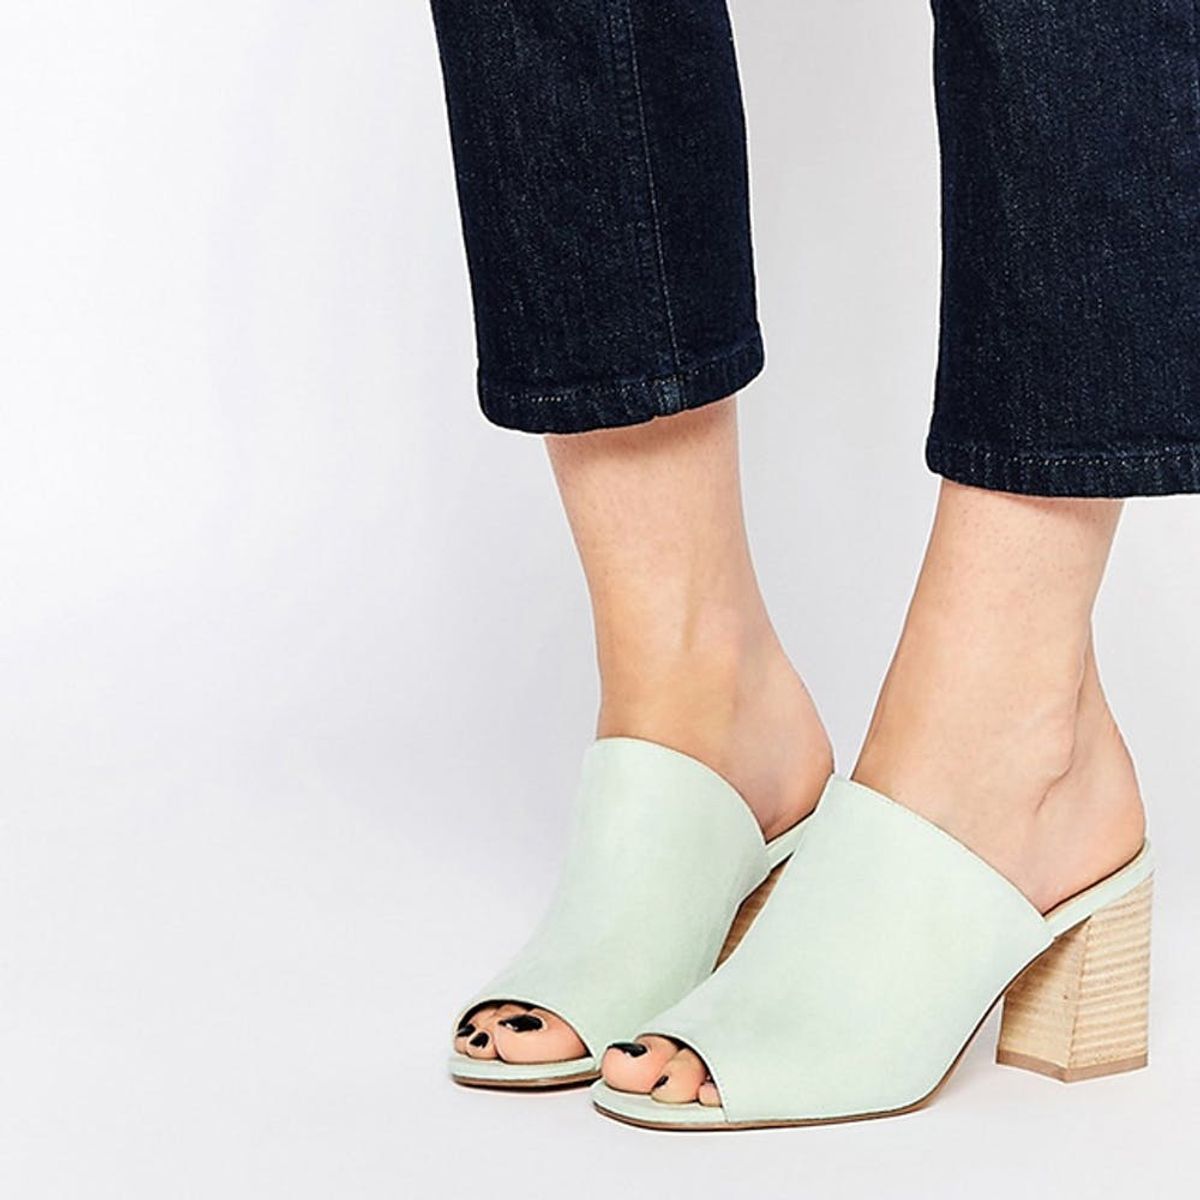 This Lazy Girl Shoe Trend Is Blowing Up for Spring